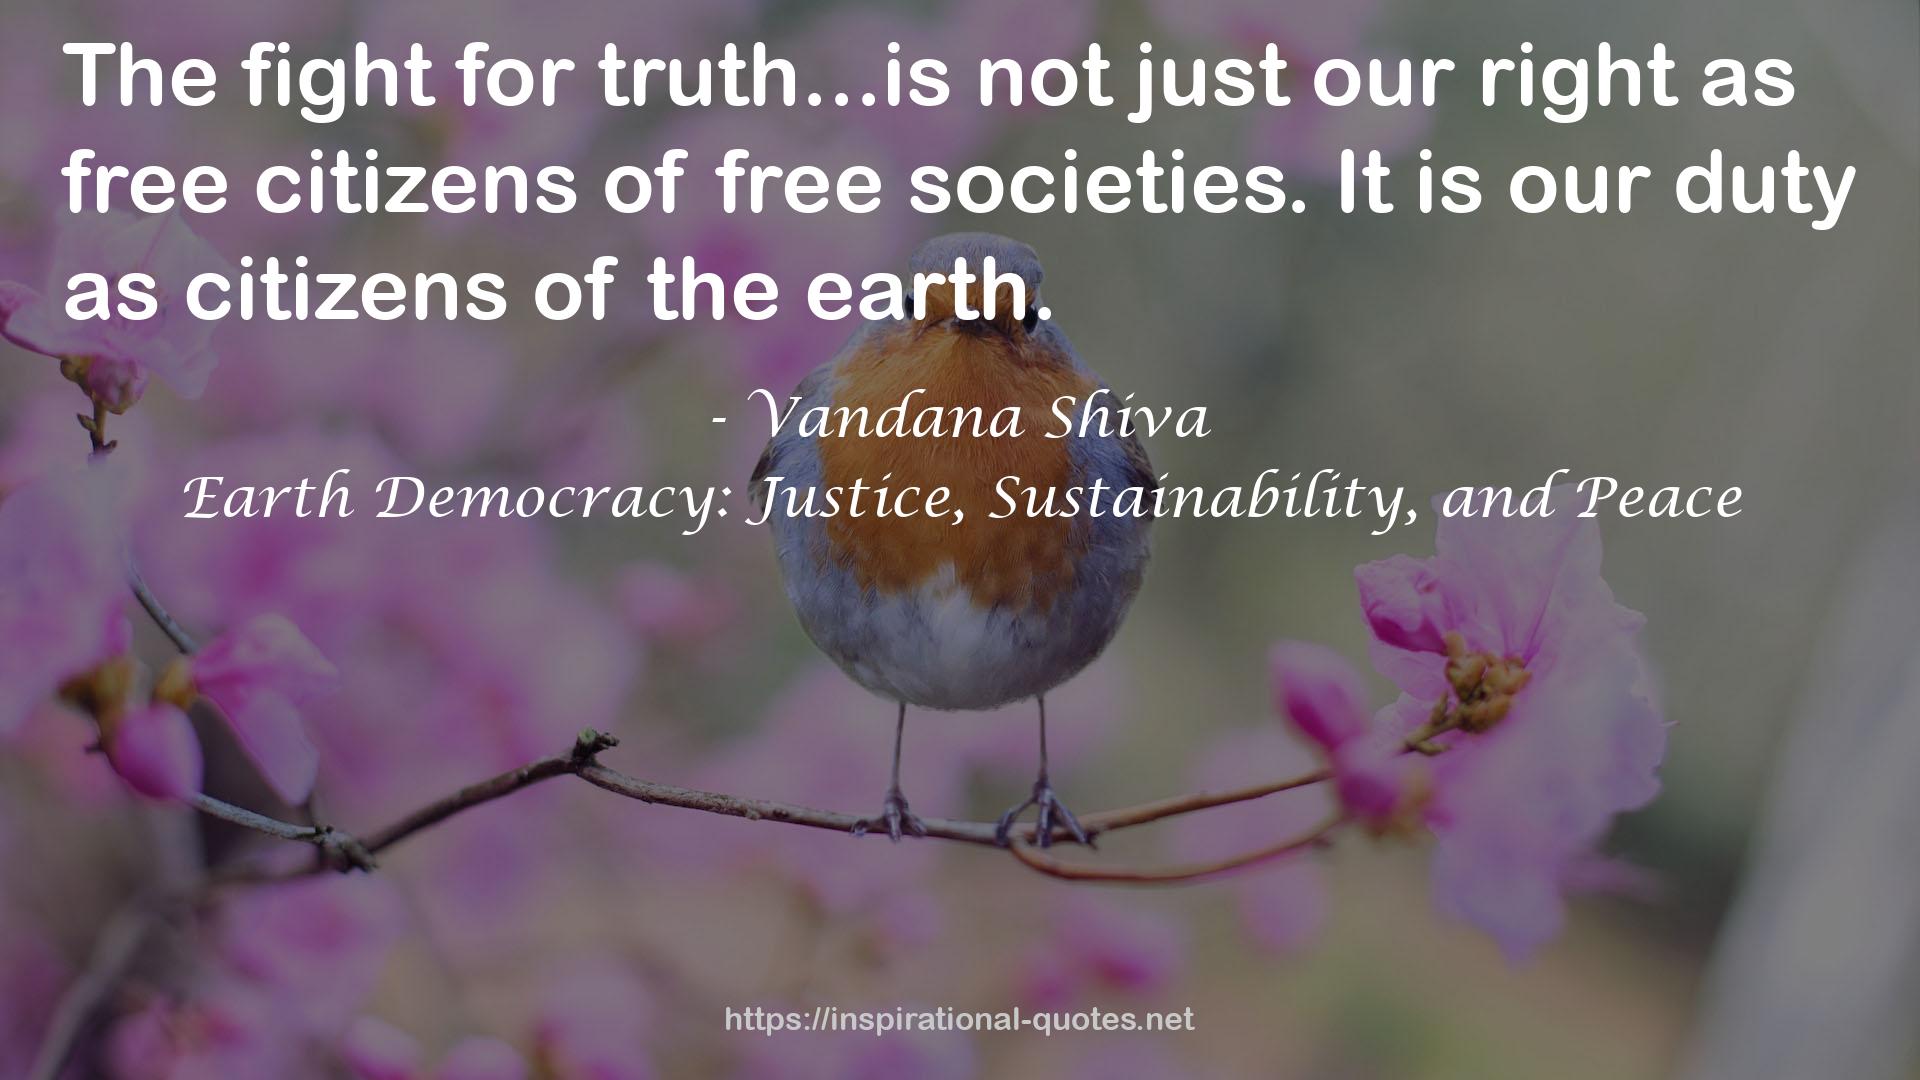 Earth Democracy: Justice, Sustainability, and Peace QUOTES